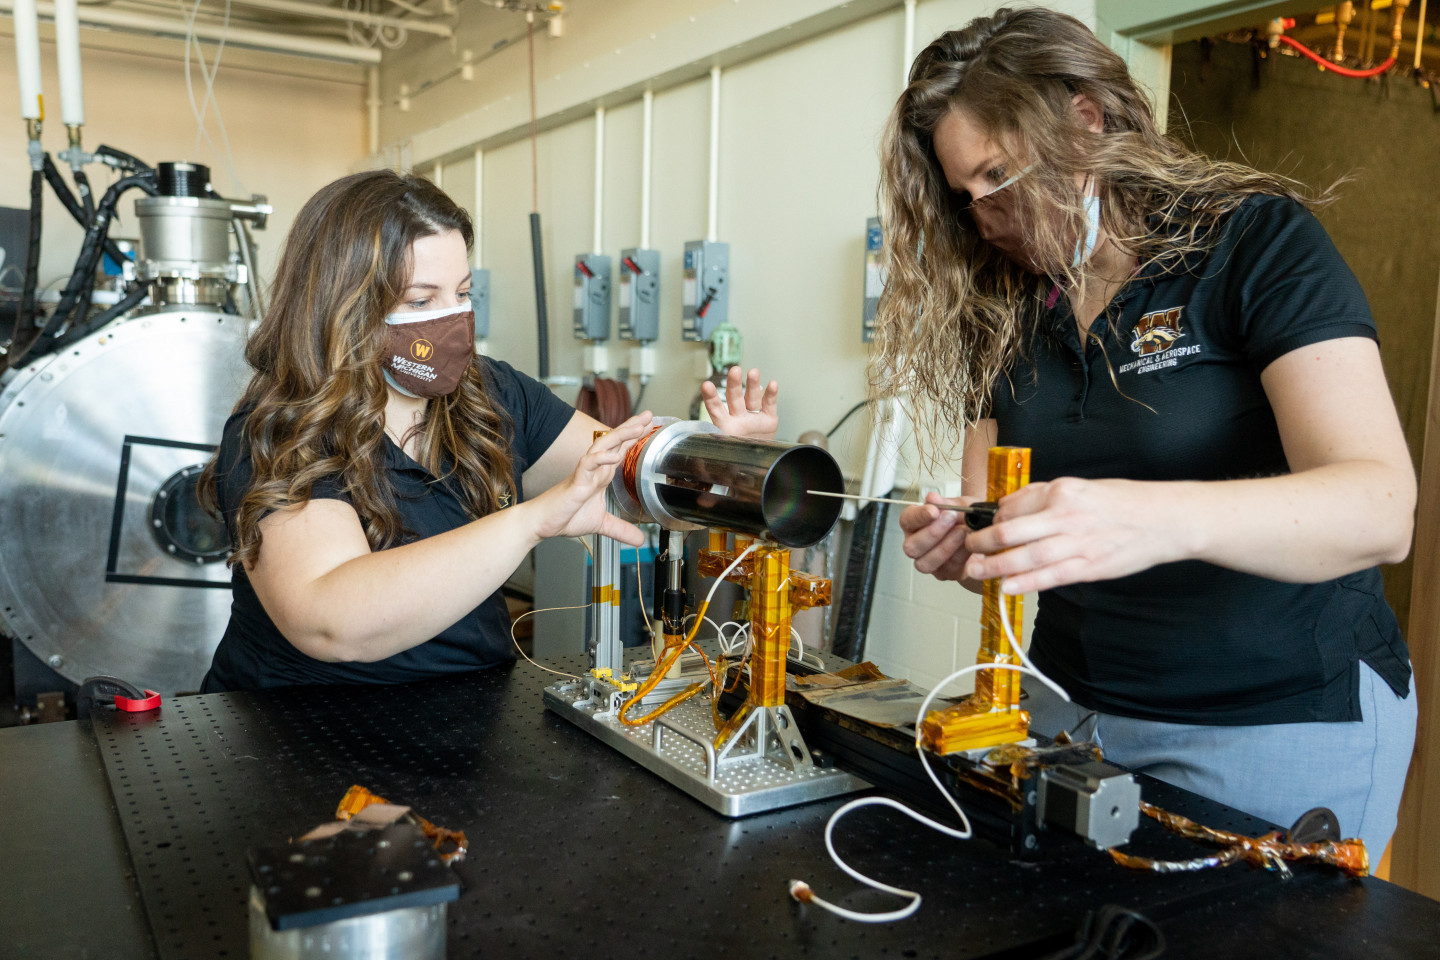 Margaret Mooney and Kristina Lemmer work on a device in a laboratory.